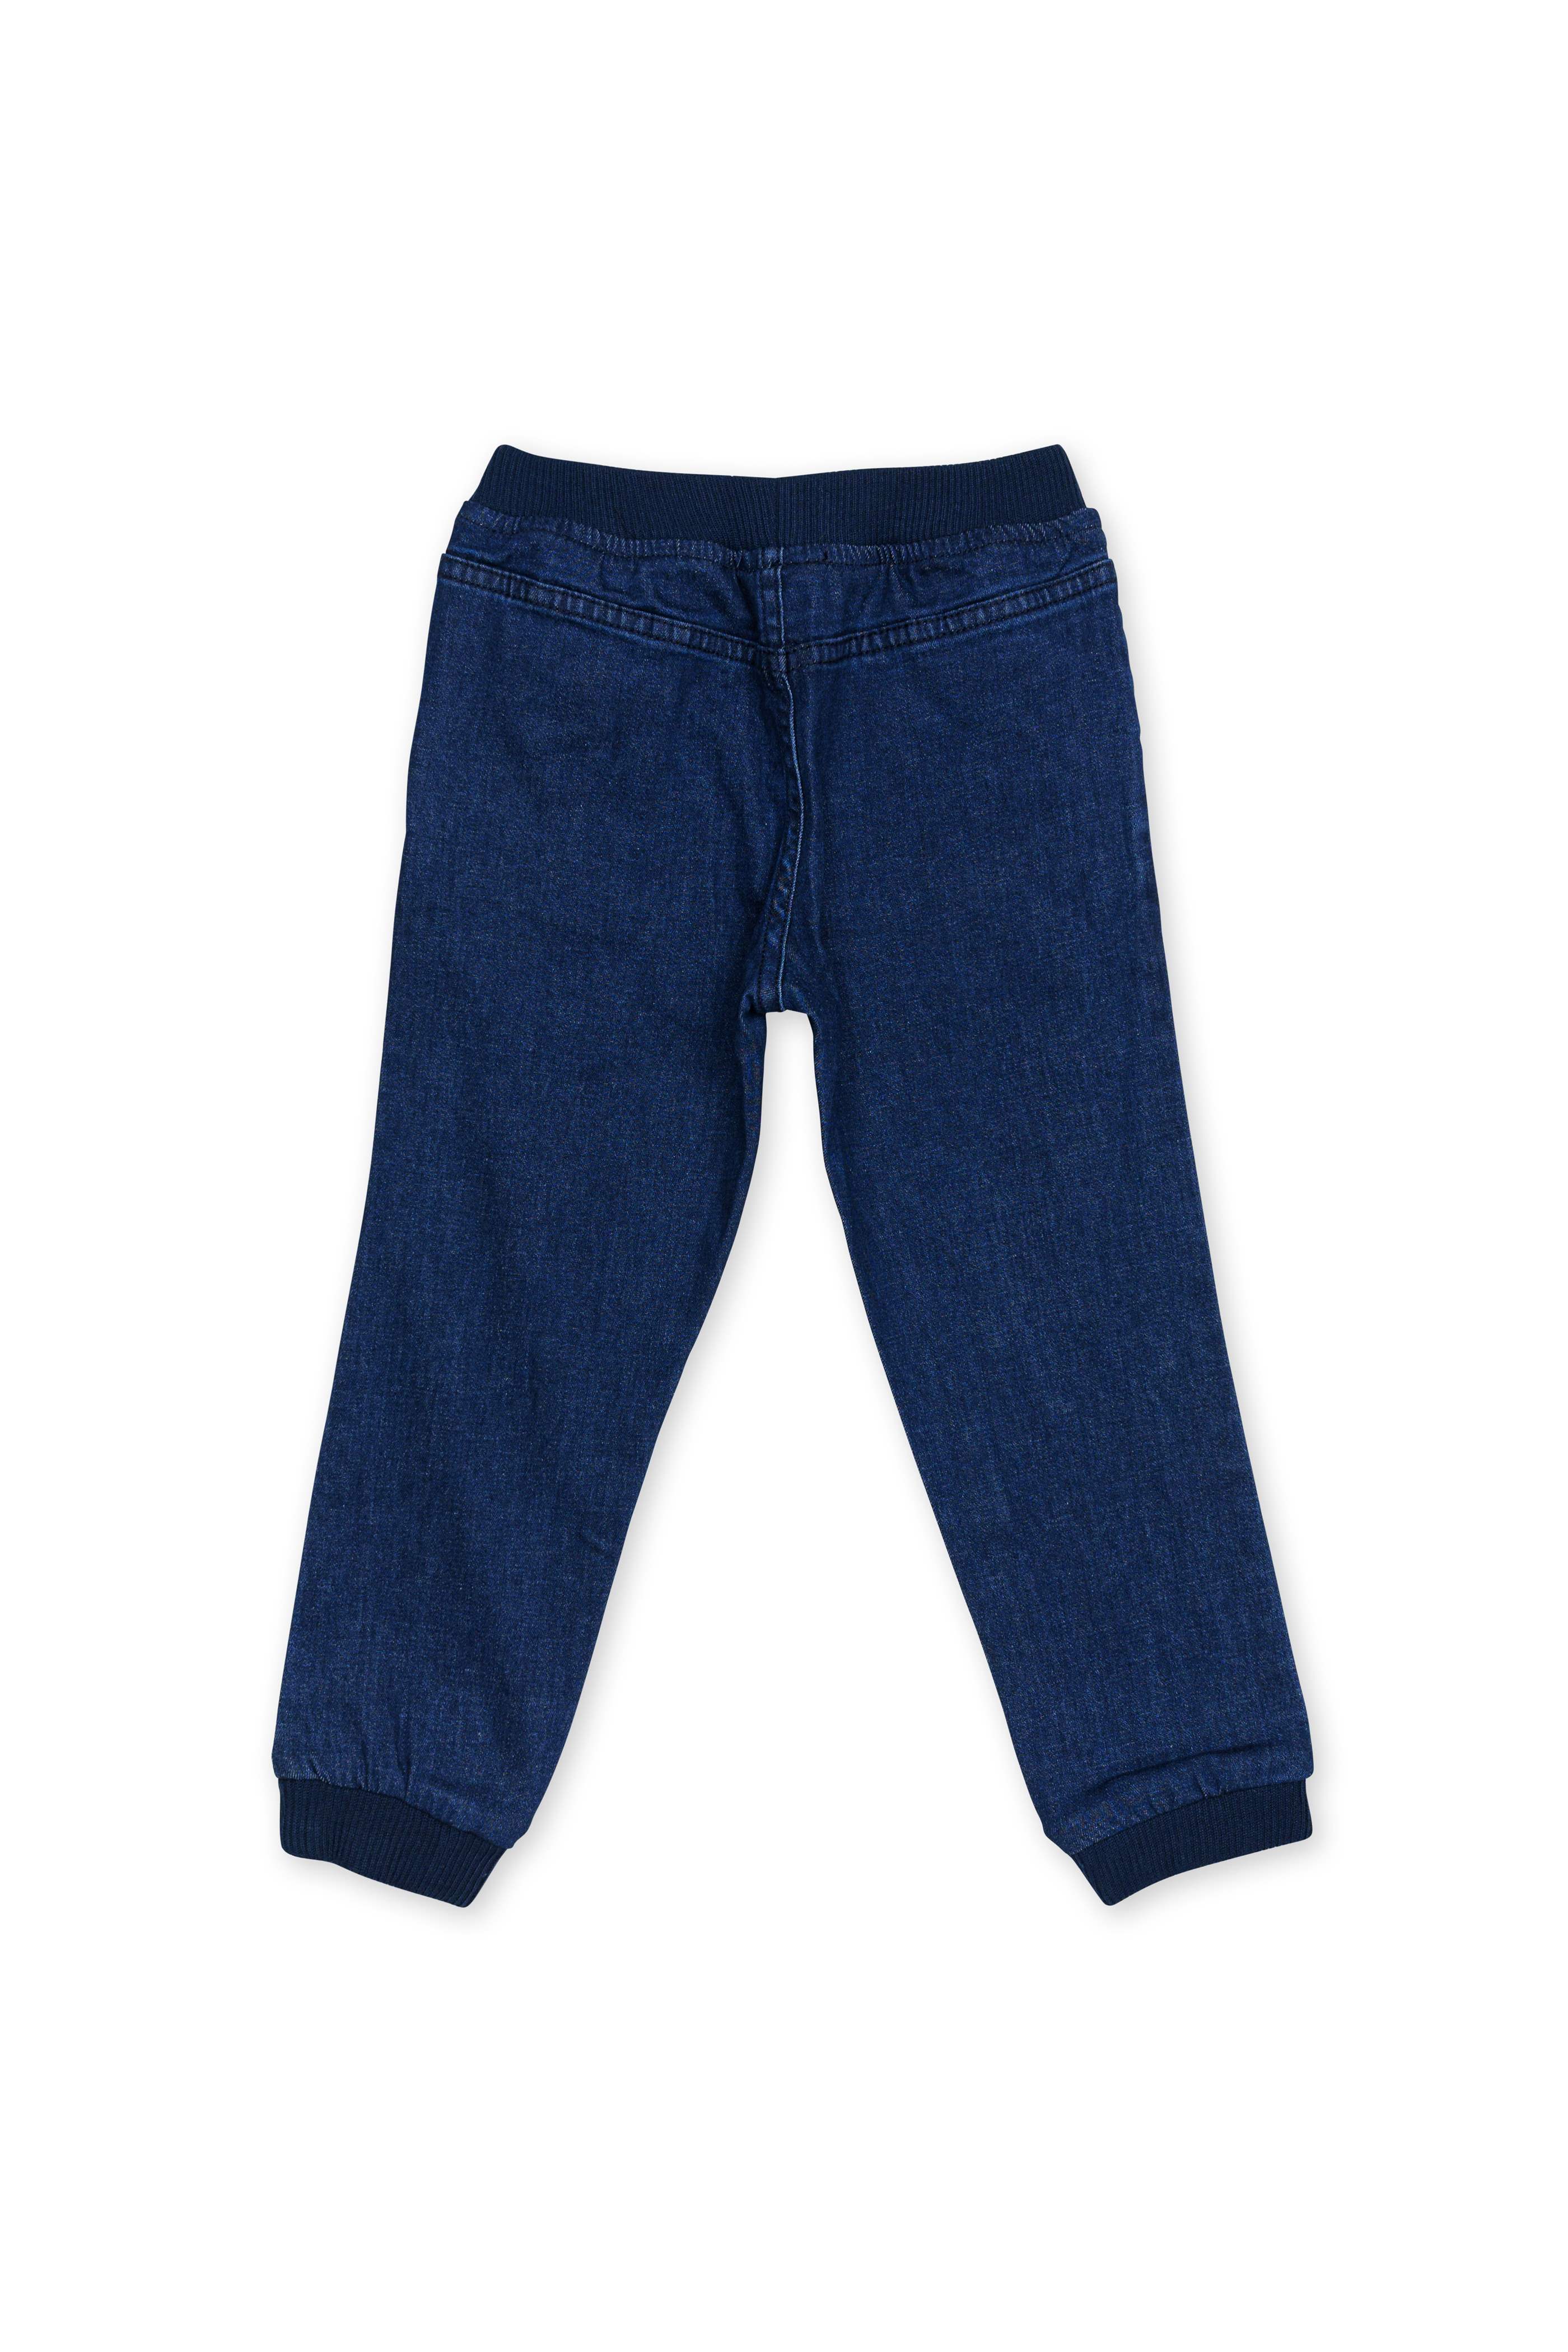 H by Hamleys Girls Embroidered Blue Jogger Jeans